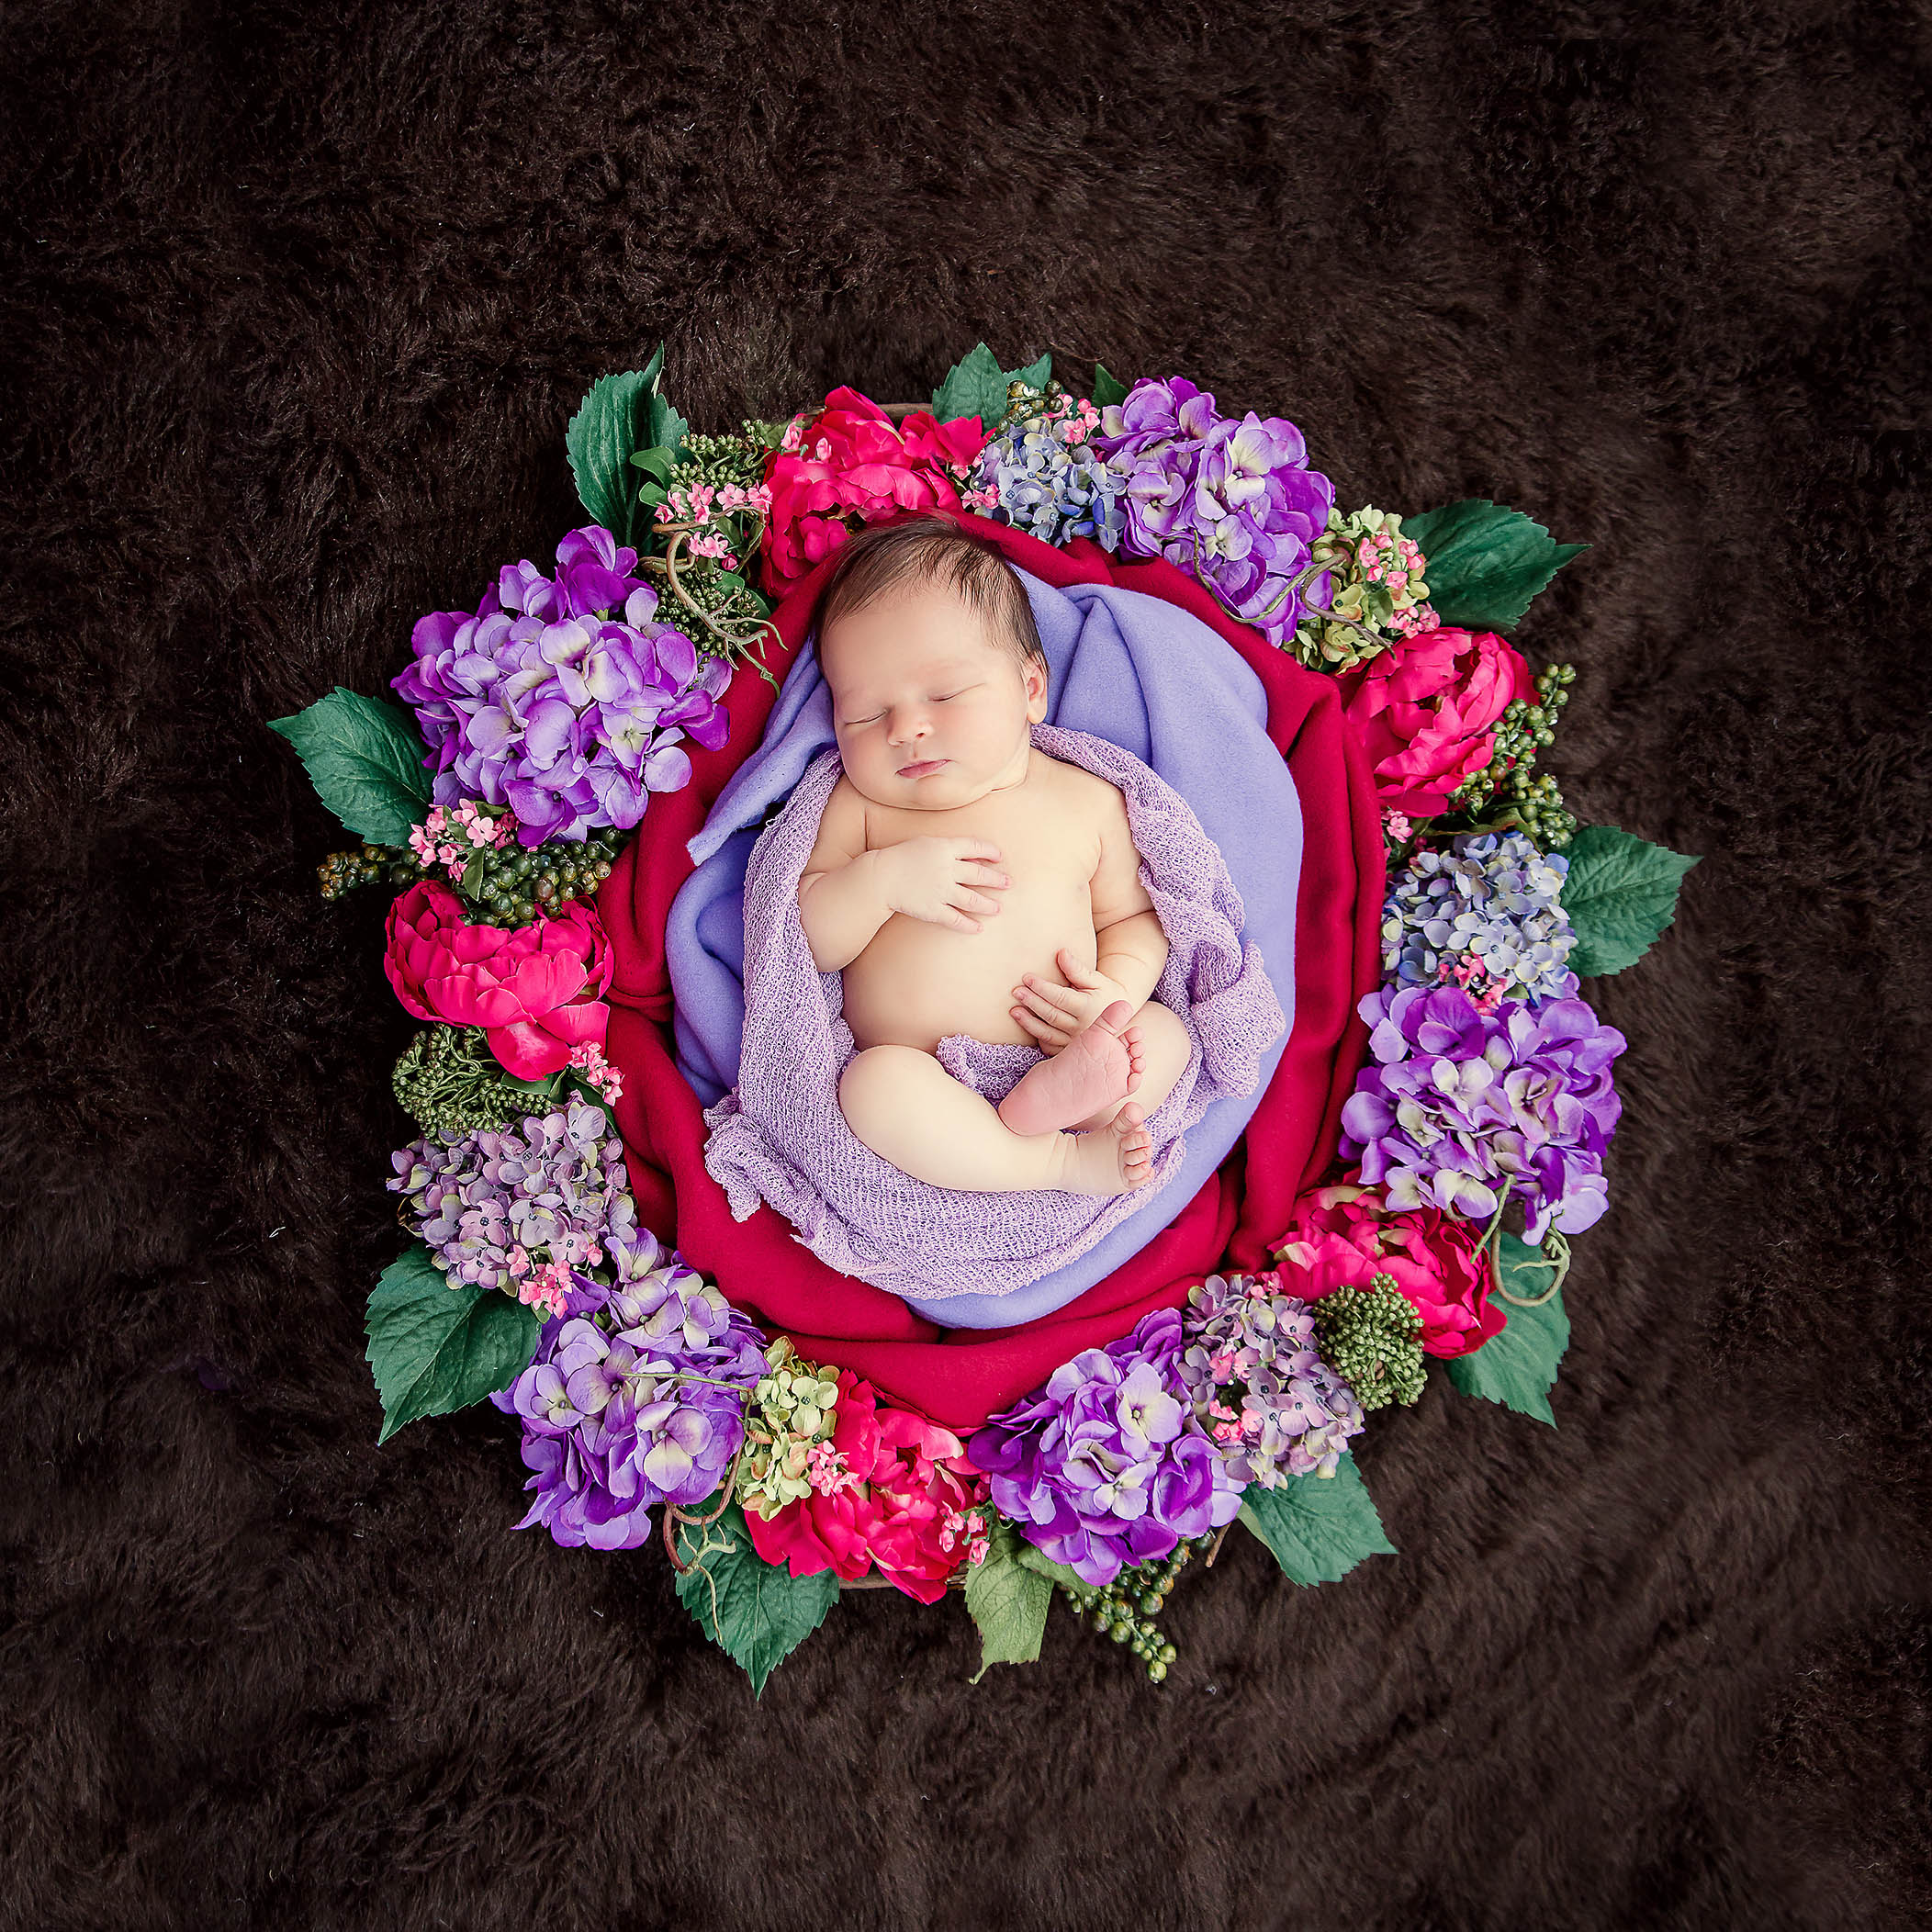 Newborn girl sleeping naked in a floral wreath of dark pink and lavender flowers